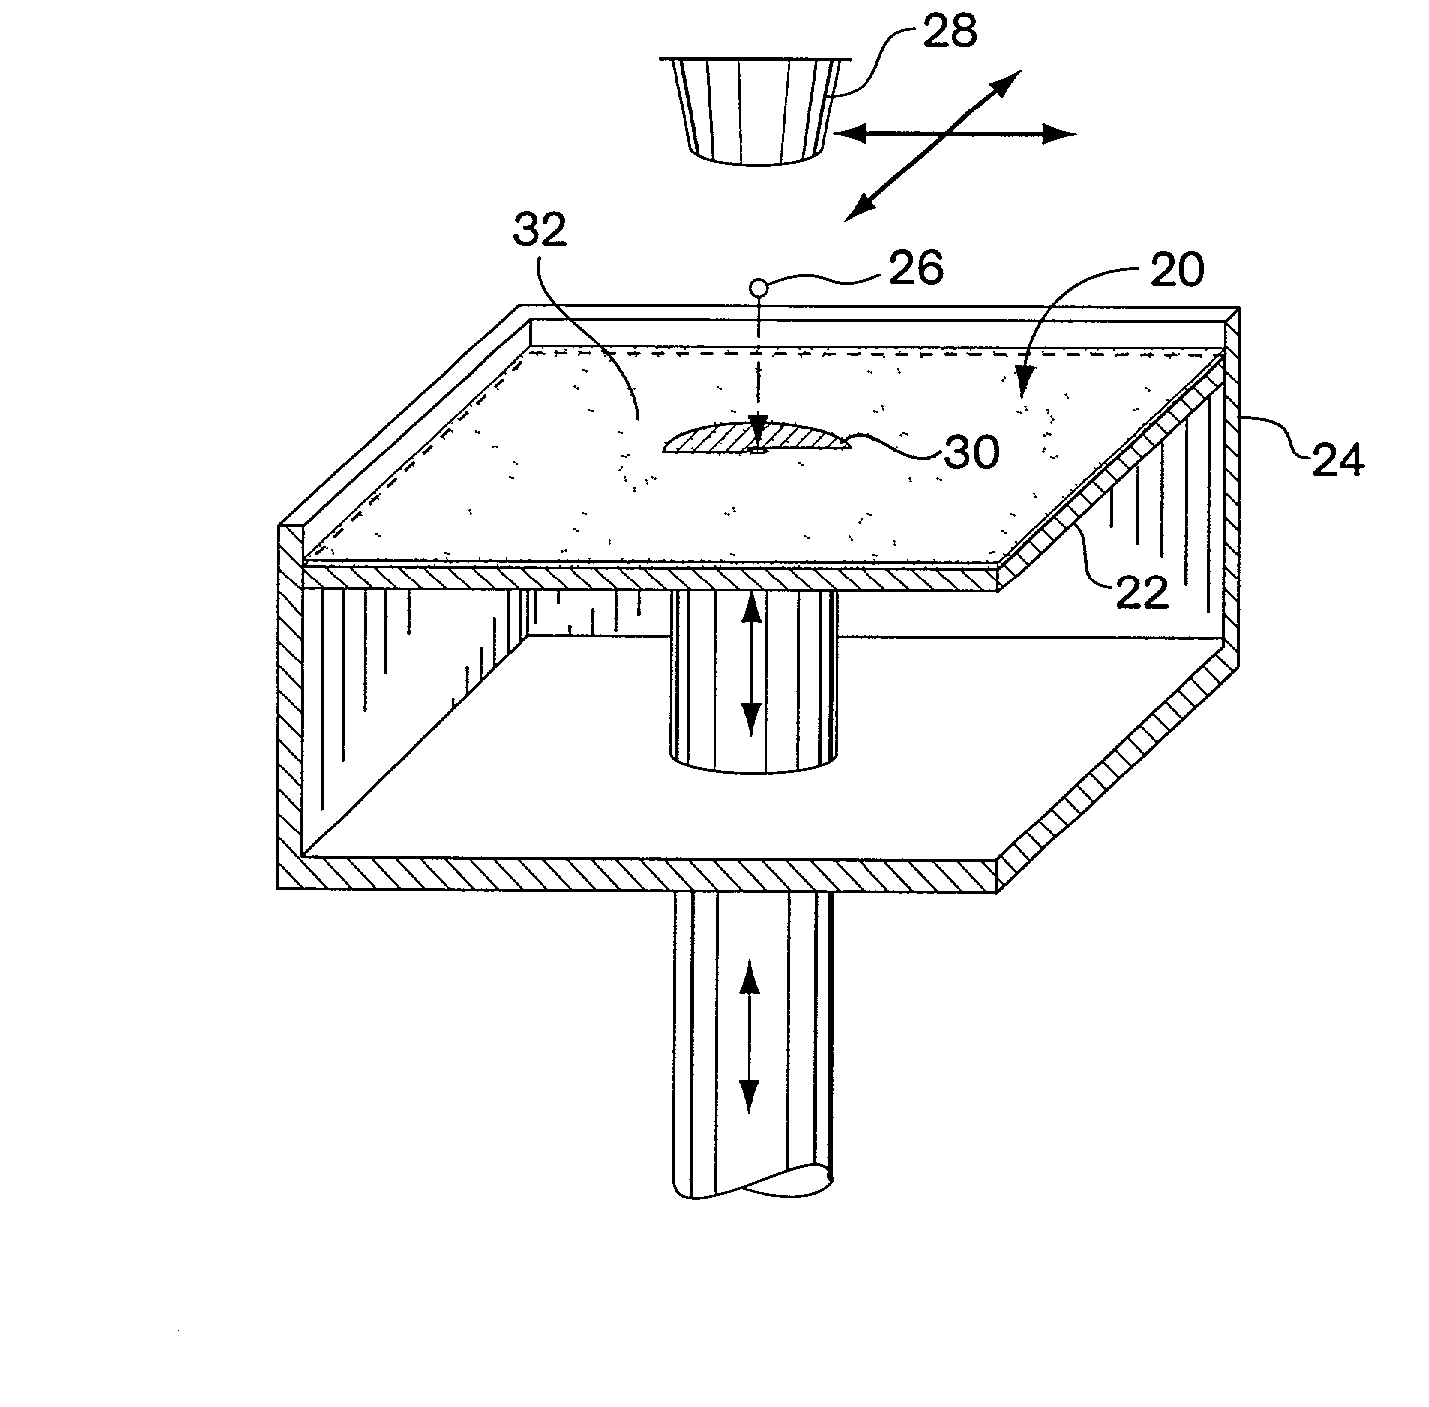 Three dimensional printing material system and method